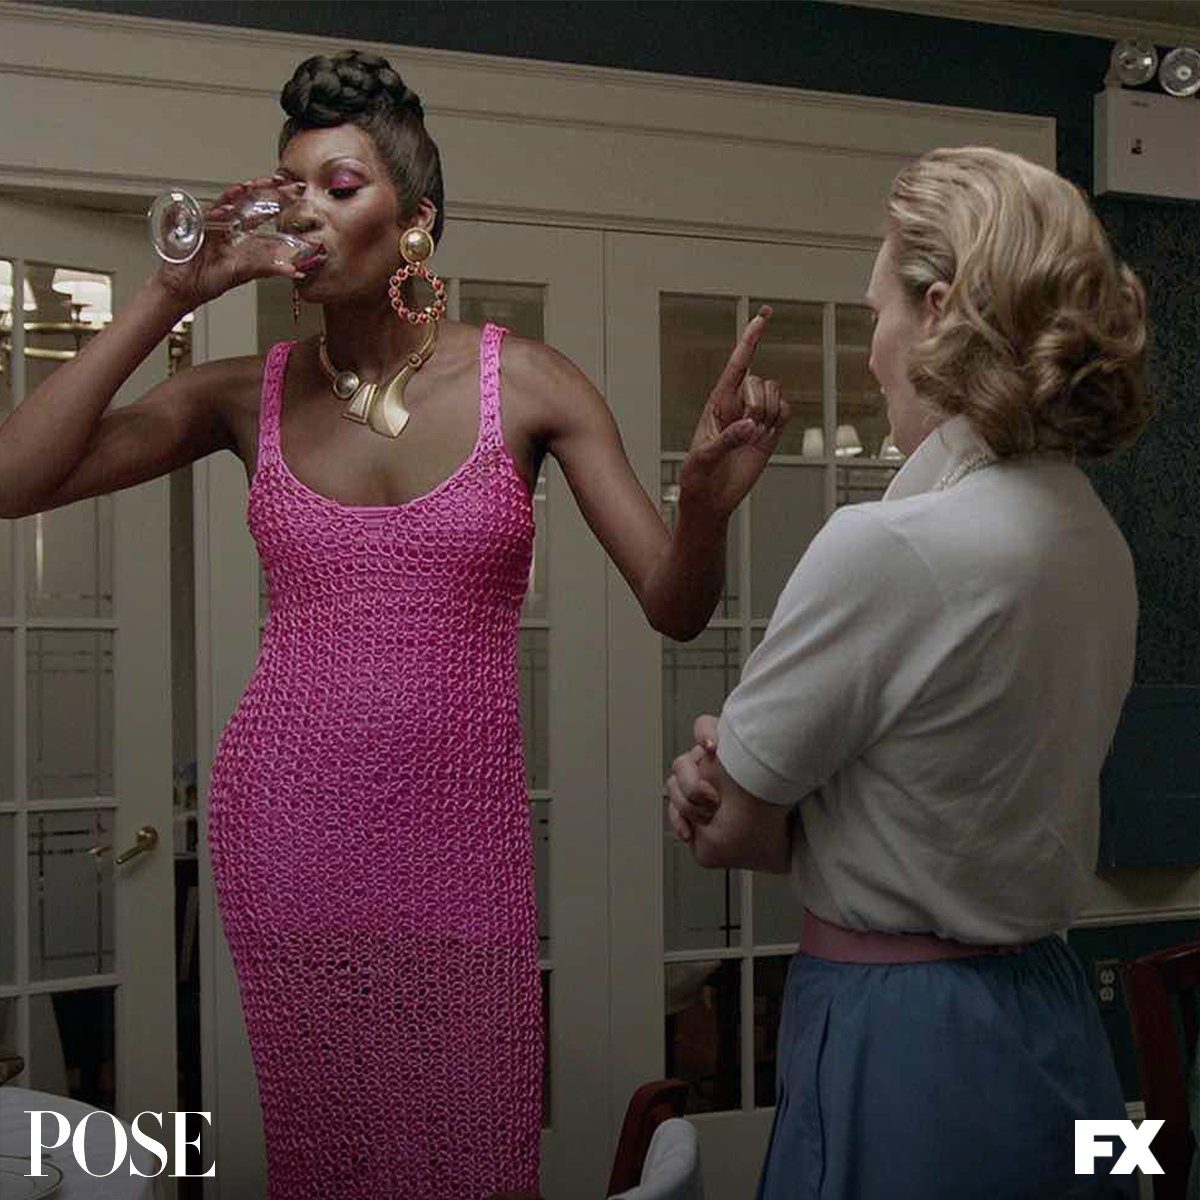 FX’s ‘Pose’ to premiere final season in May 2021